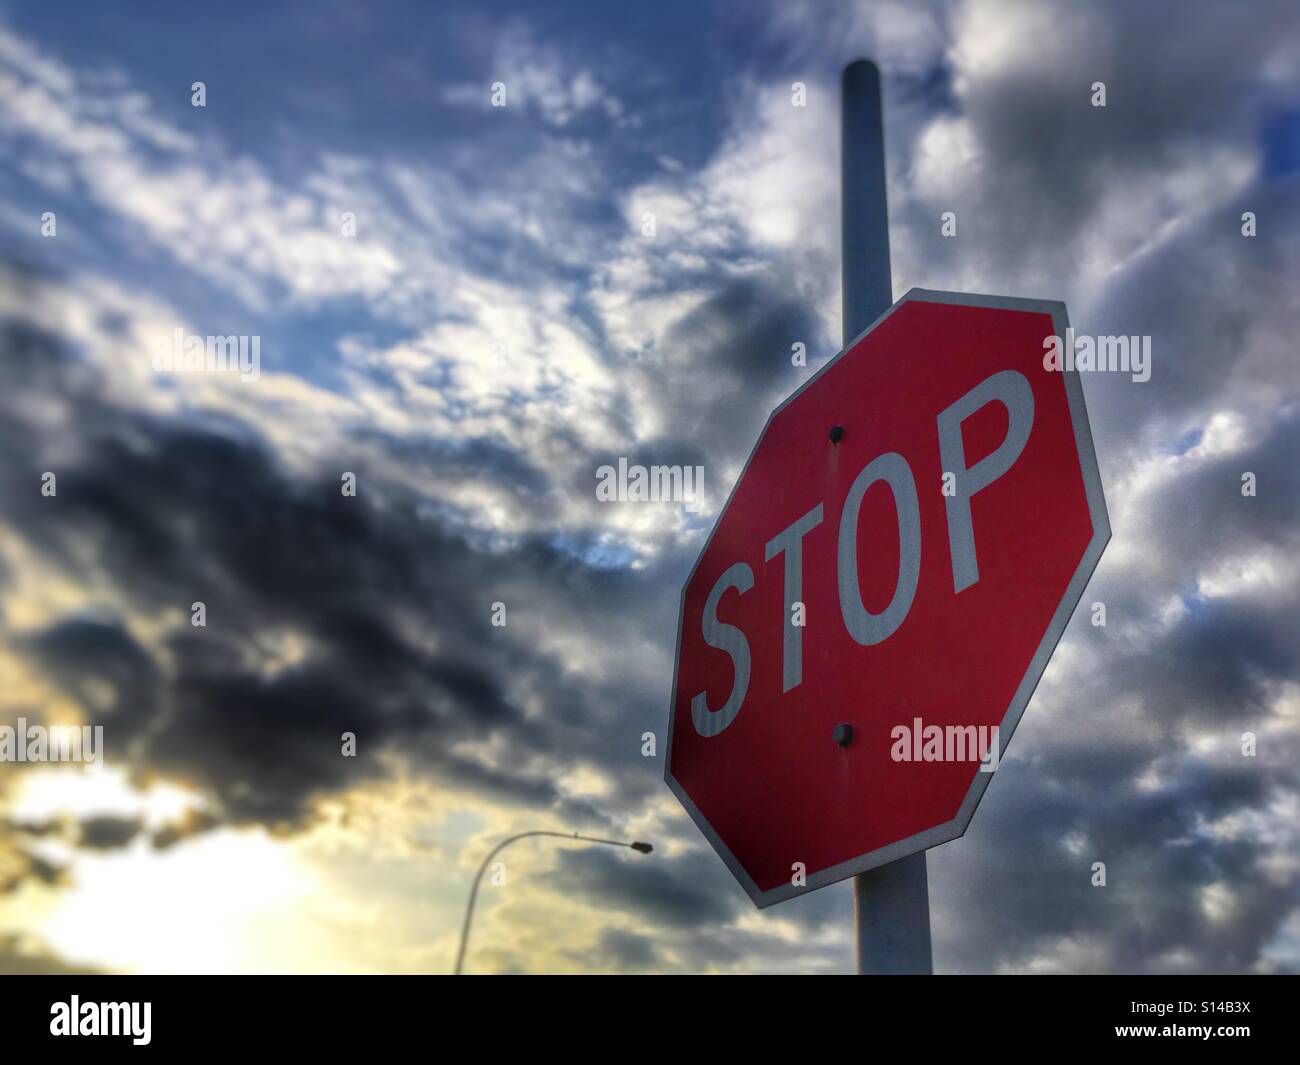 Stop sign. Stock Photo